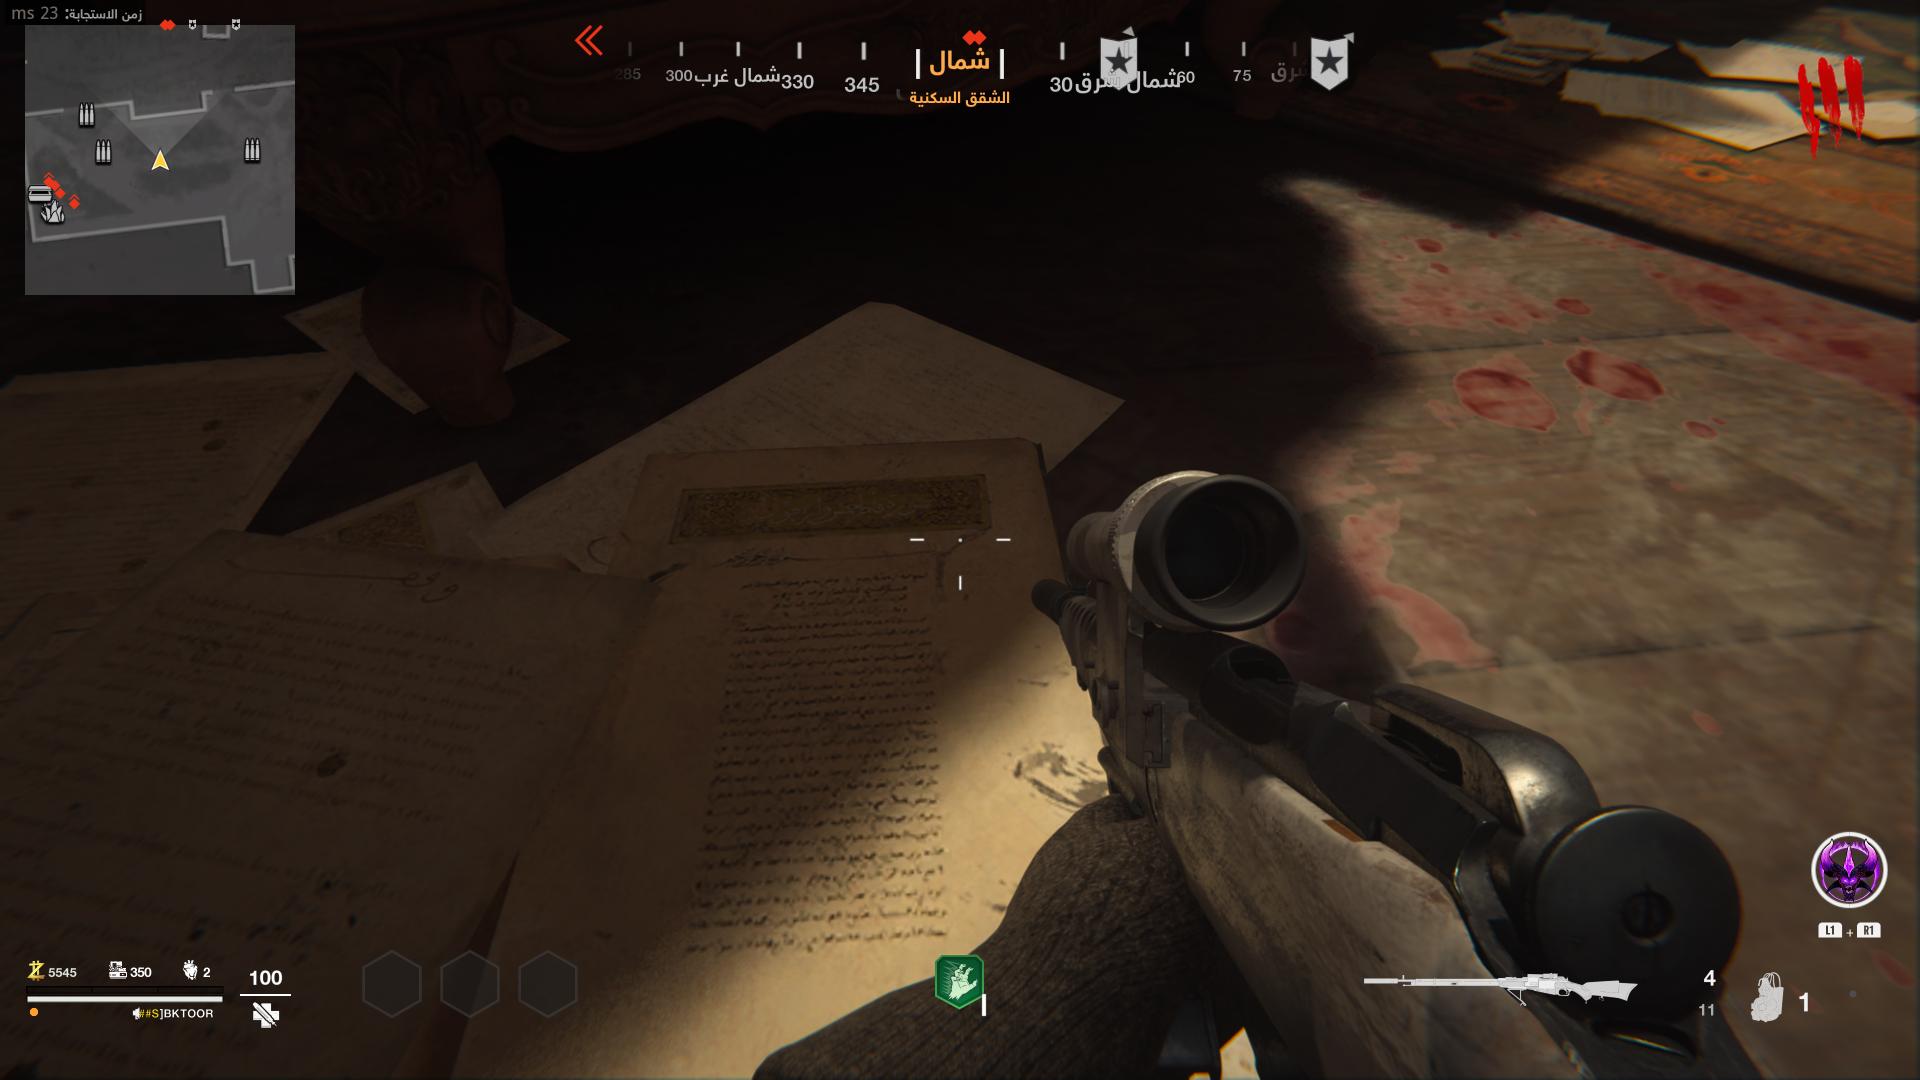  Activision apologises as Call of Duty: Vanguard removes bloodstained Quran pages 